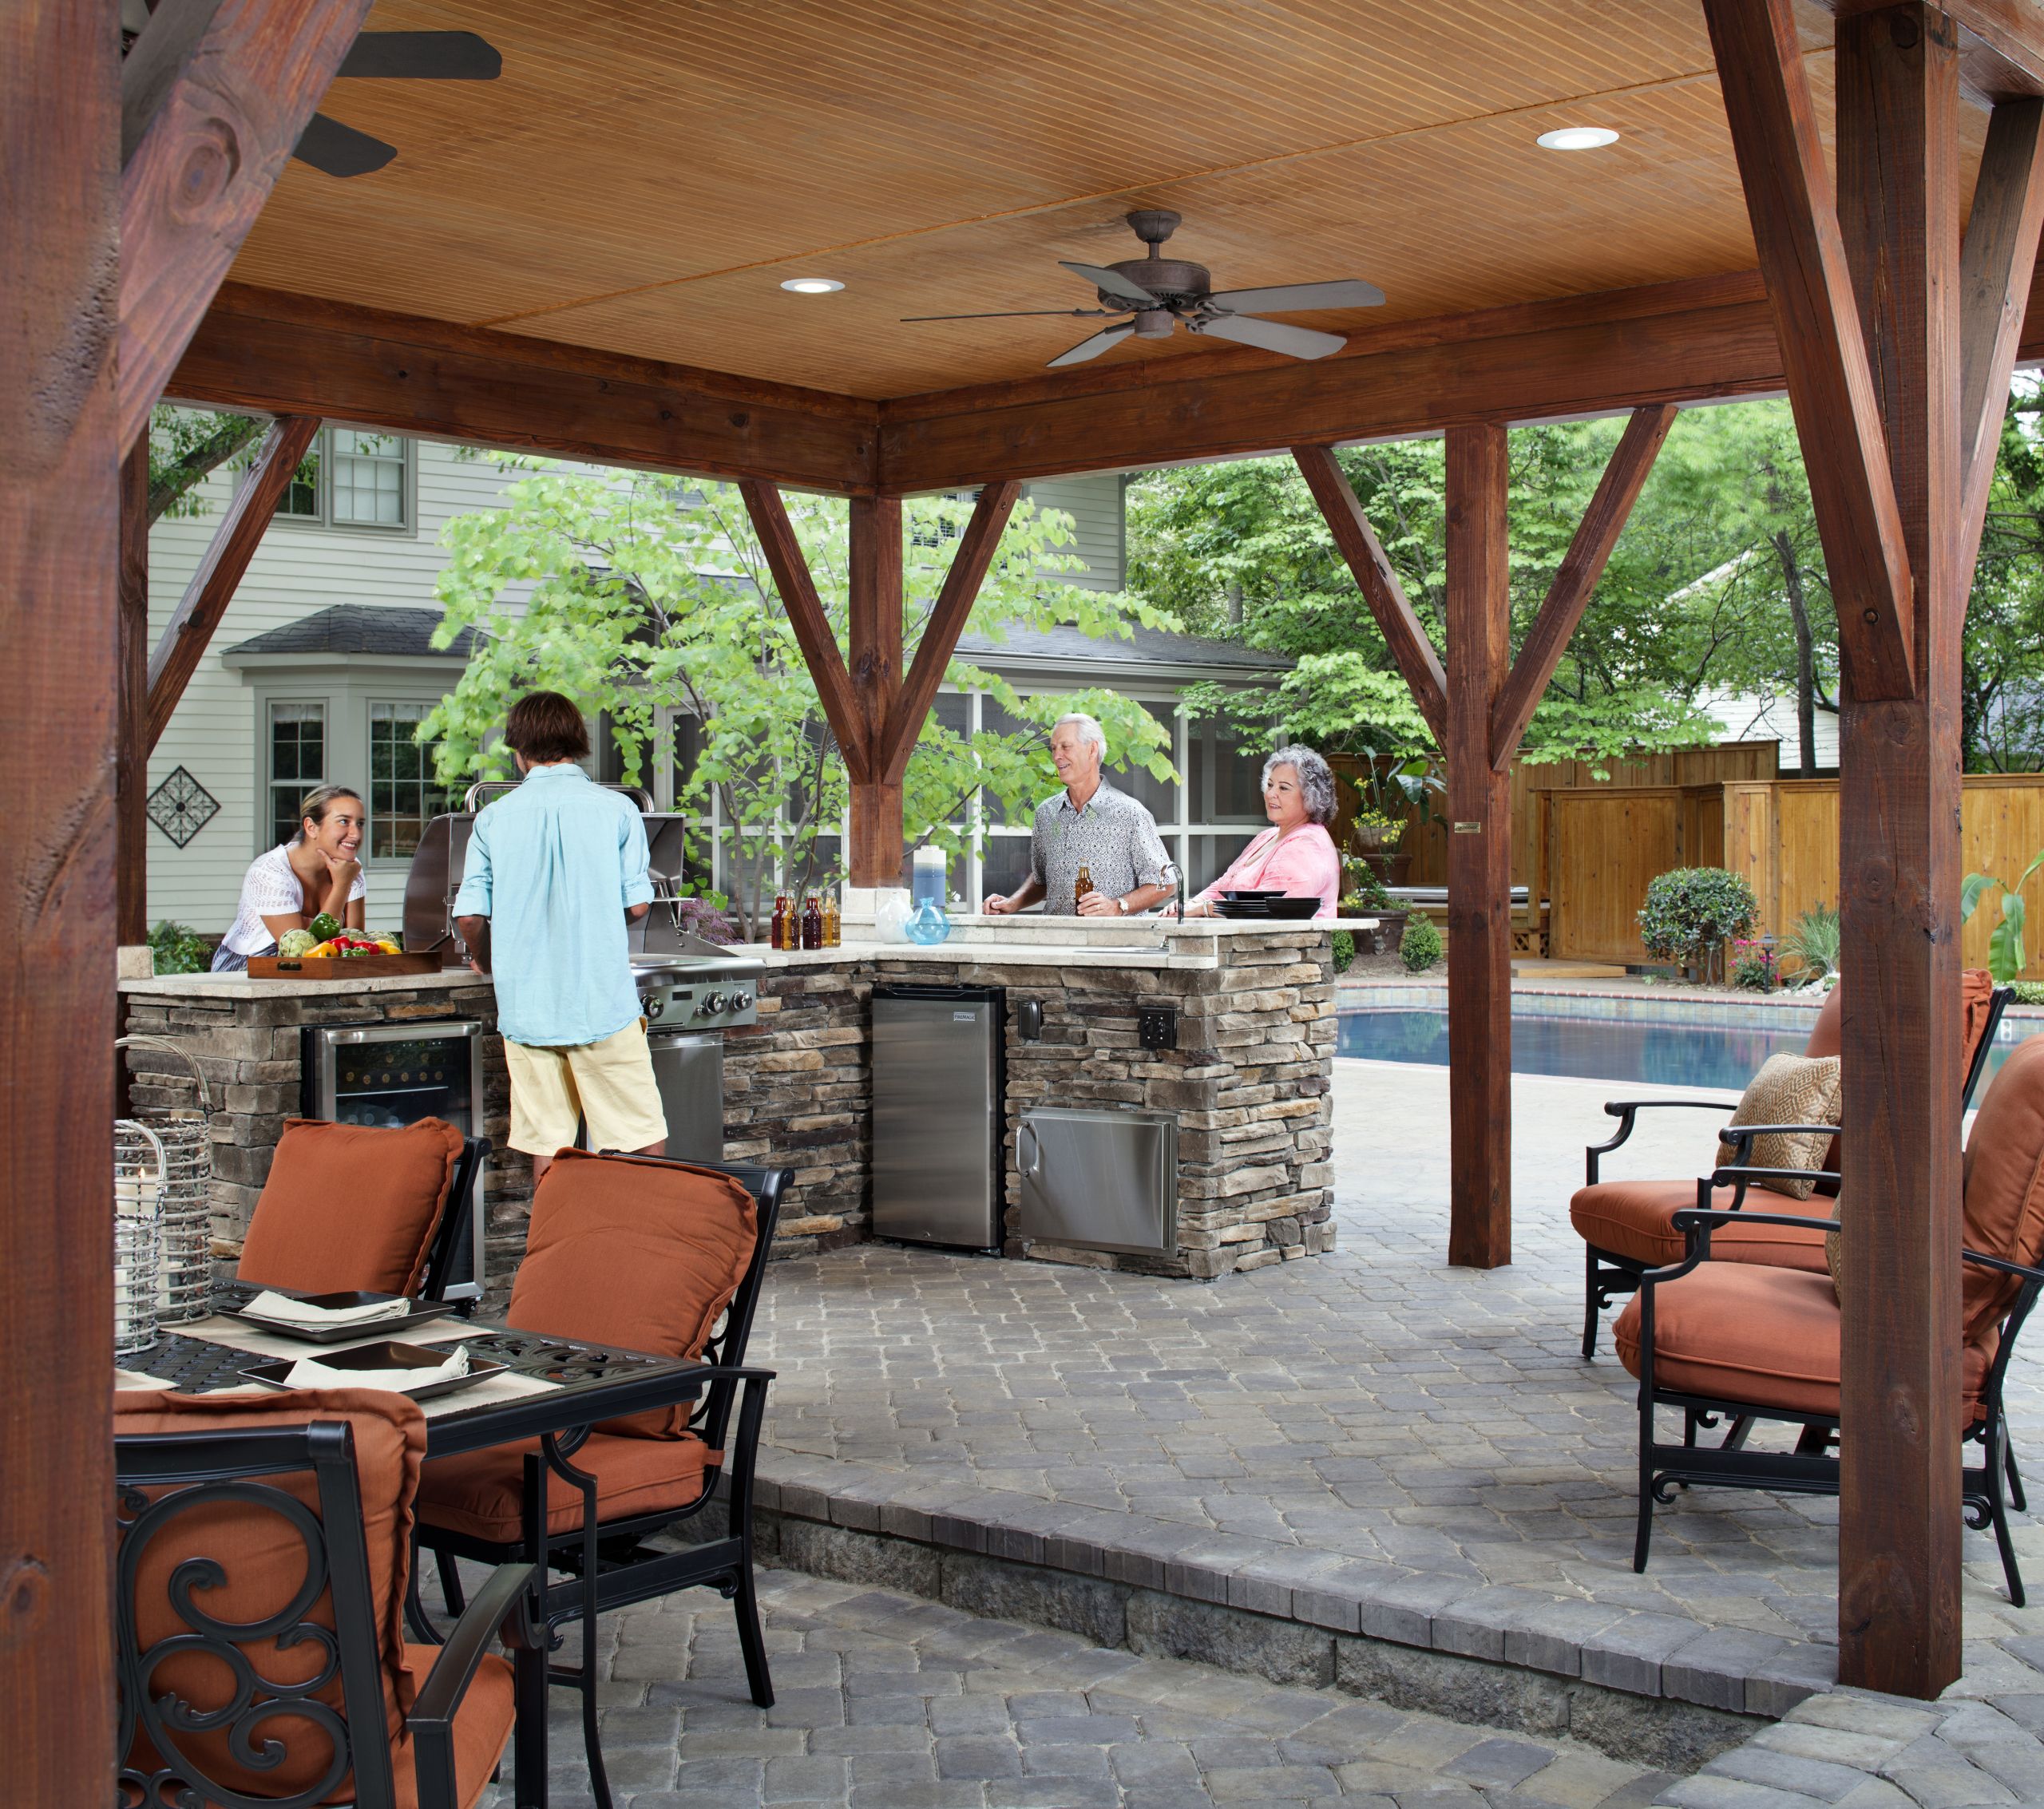 Outdoor Patio Kitchen Designs
 How to Design Your Perfect Outdoor kitchen Outdoor